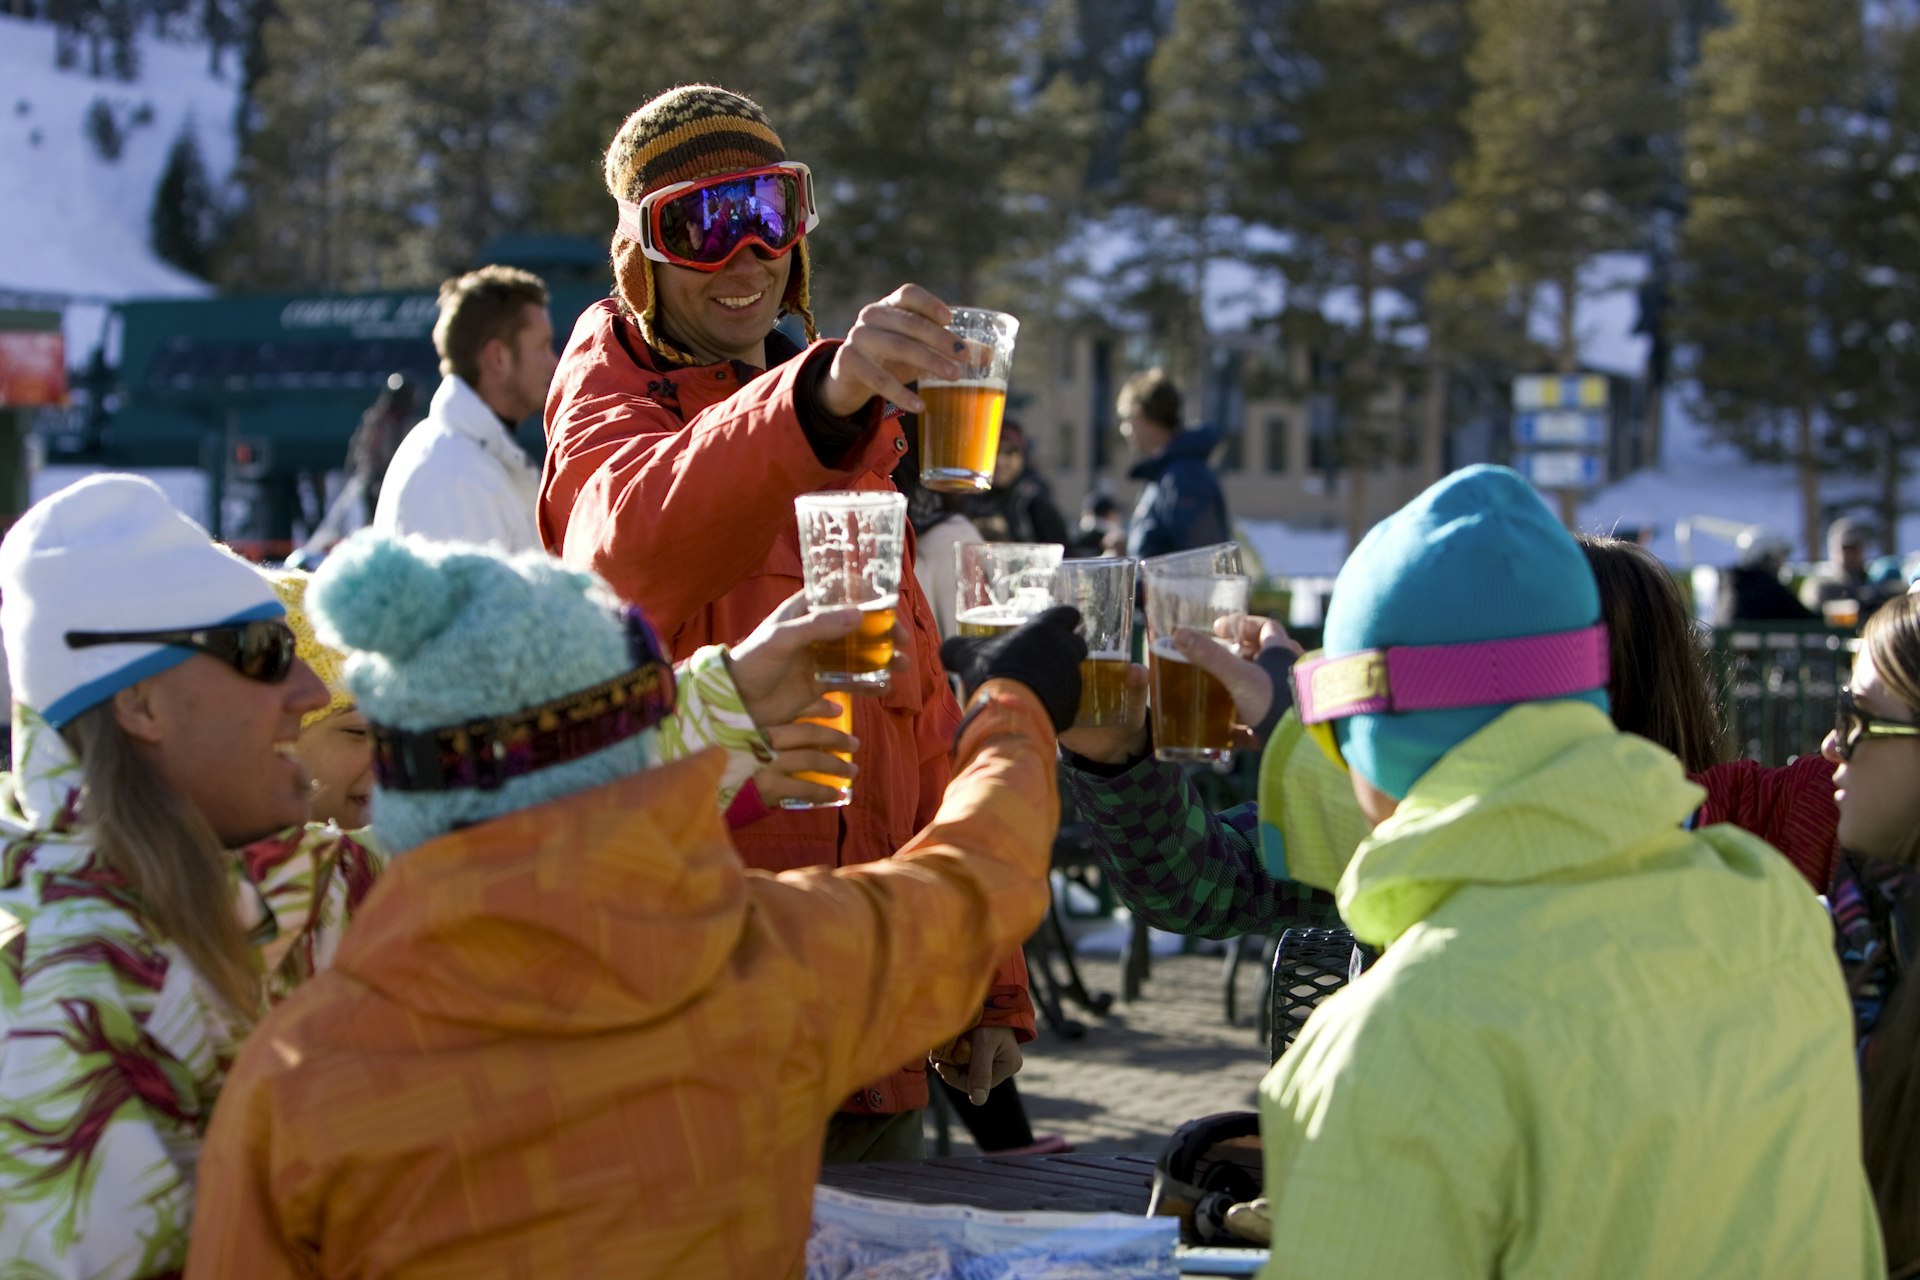 Friends in ski gear socialize and enjoy a beer on the deck on a sunny day on the mountain.